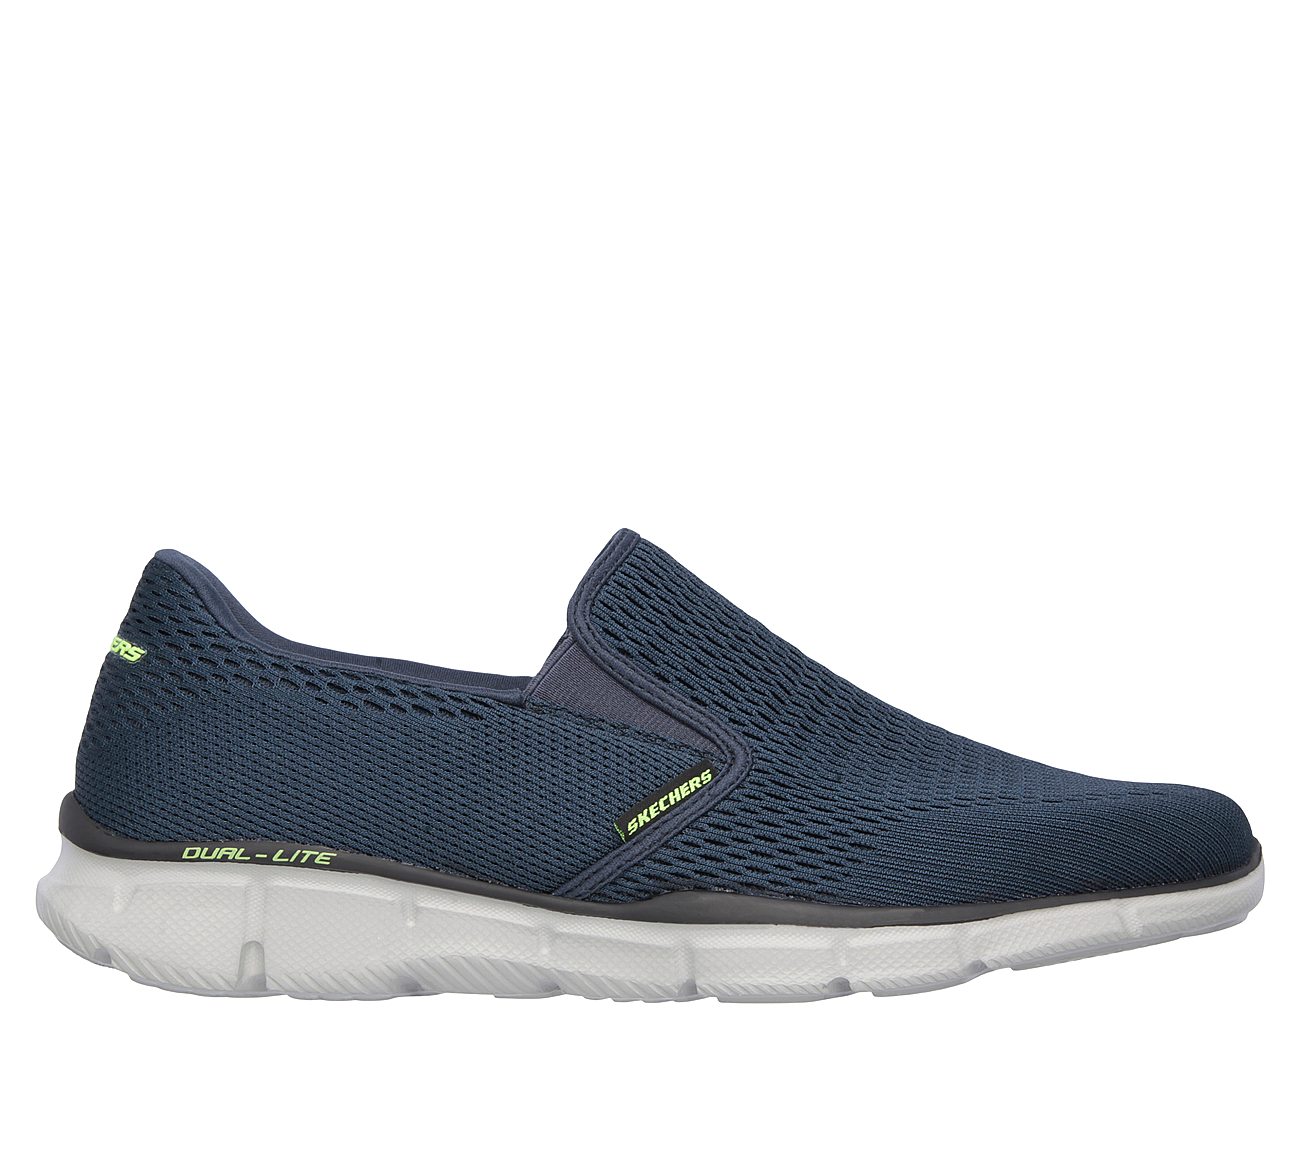 EQUALIZER- DOUBLE PLAY, NNNAVY Footwear Lateral View